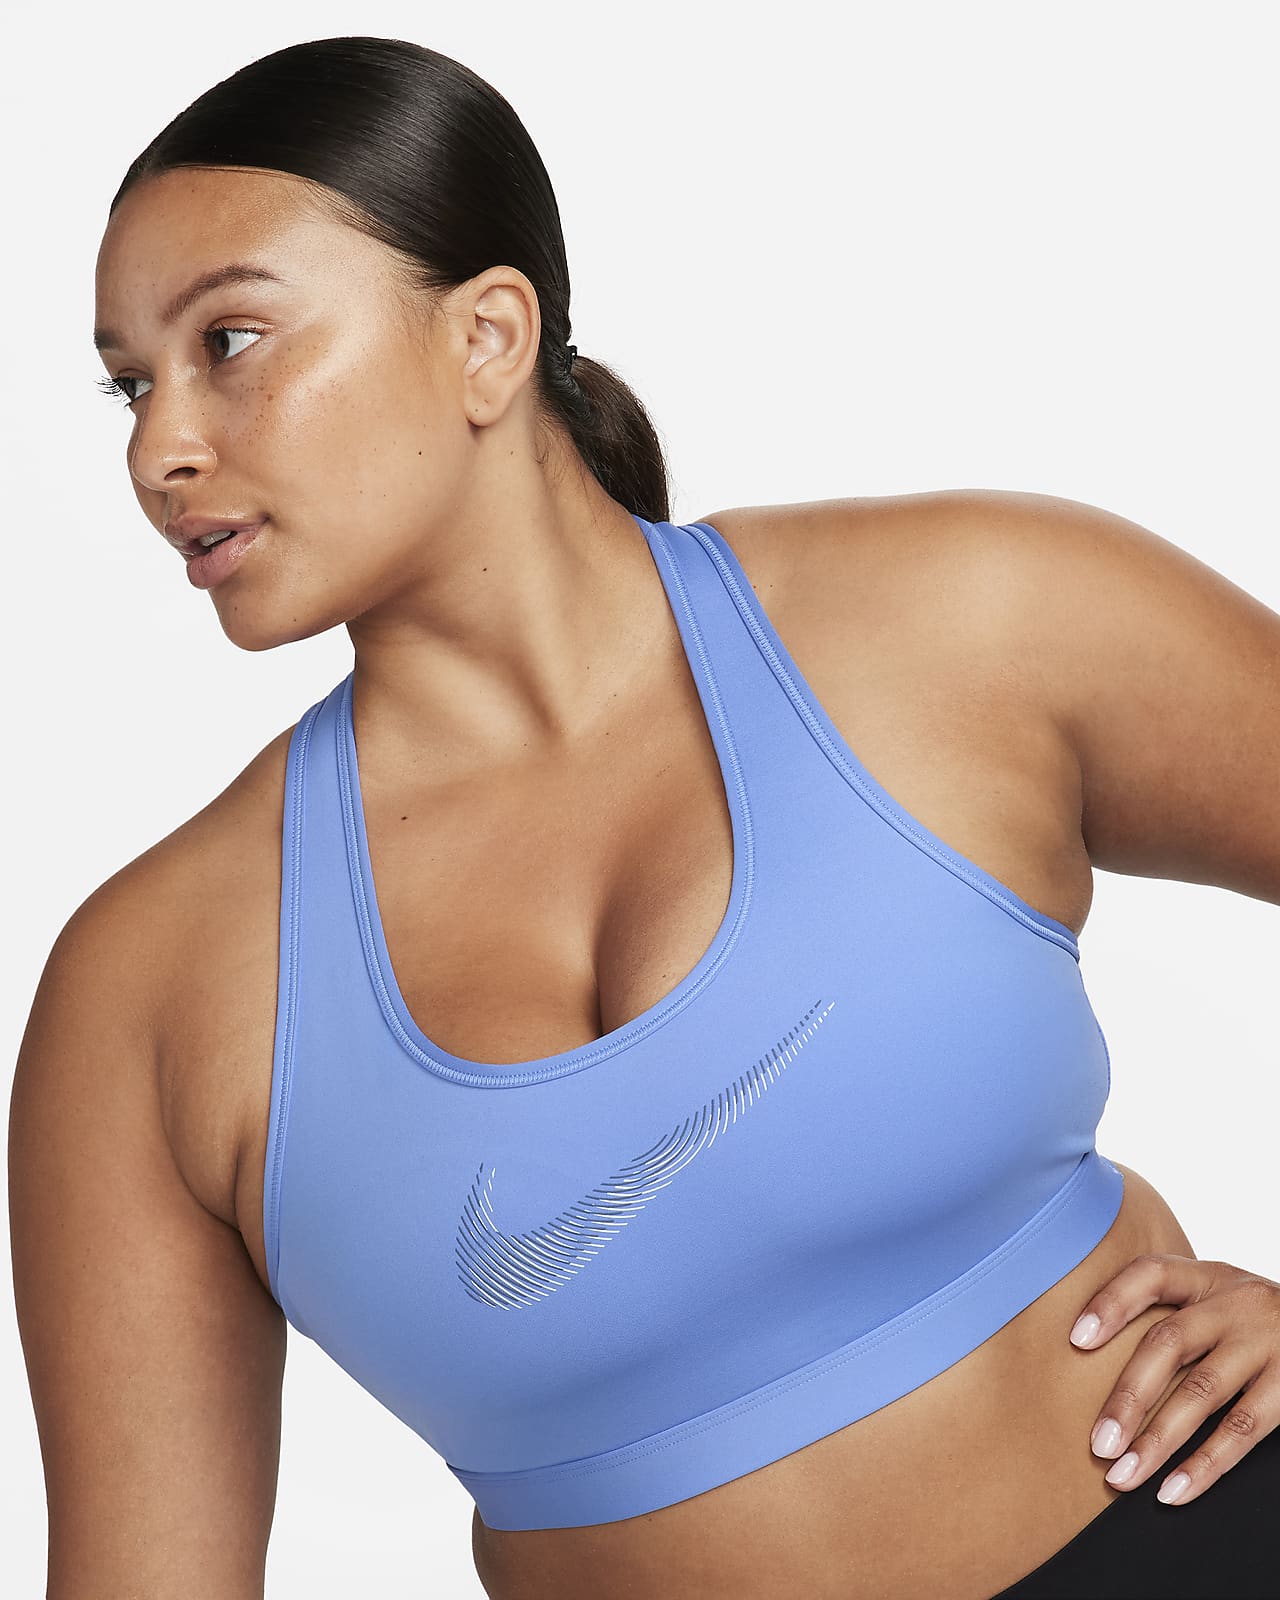 https://static.nike.com/a/images/t_PDP_1280_v1/f_auto,q_auto:eco/9c4501a0-d591-4388-b2e6-0b95ff02fefe/swoosh-support-padded-graphic-sports-bra-XhZs77.png